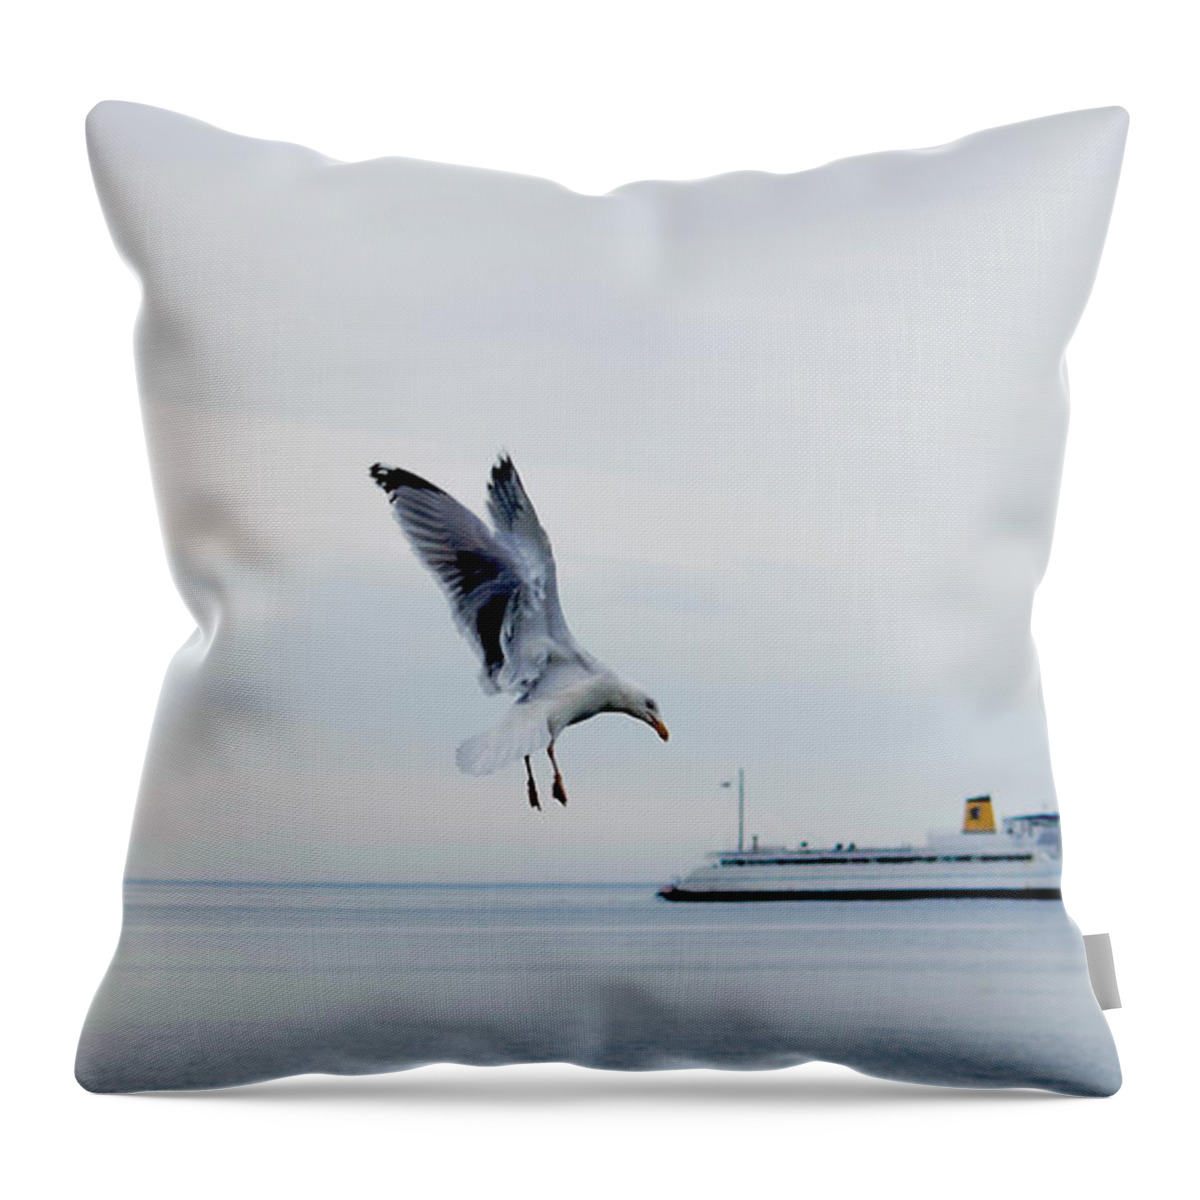 Seagull Throw Pillow featuring the photograph Giant Seagull Attacks Ferry by Debra Banks